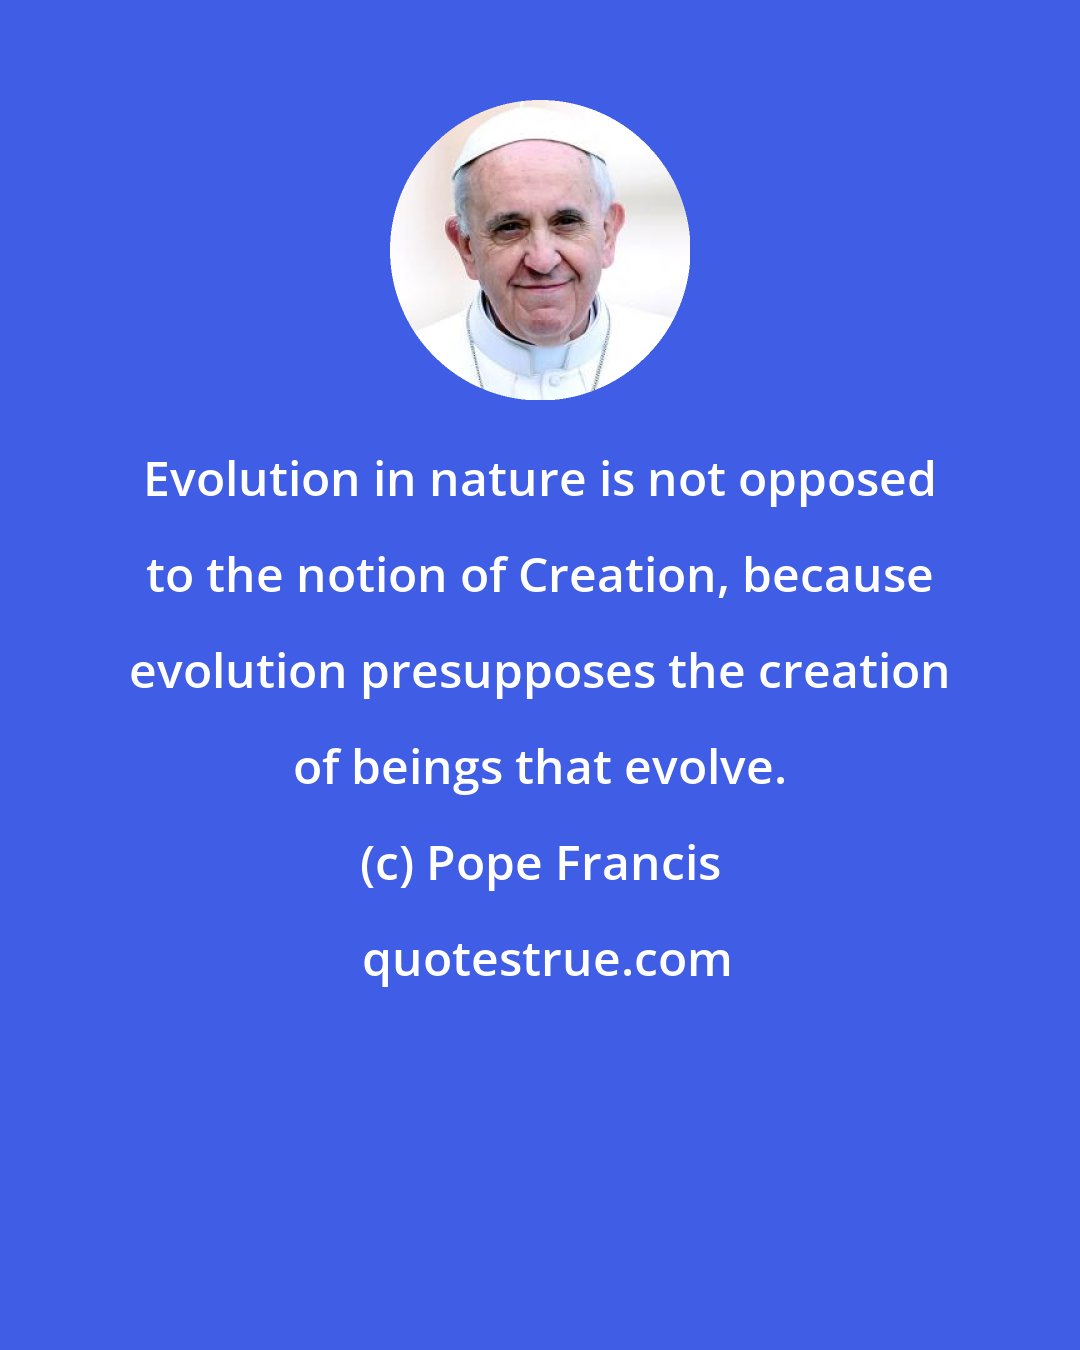 Pope Francis: Evolution in nature is not opposed to the notion of Creation, because evolution presupposes the creation of beings that evolve.